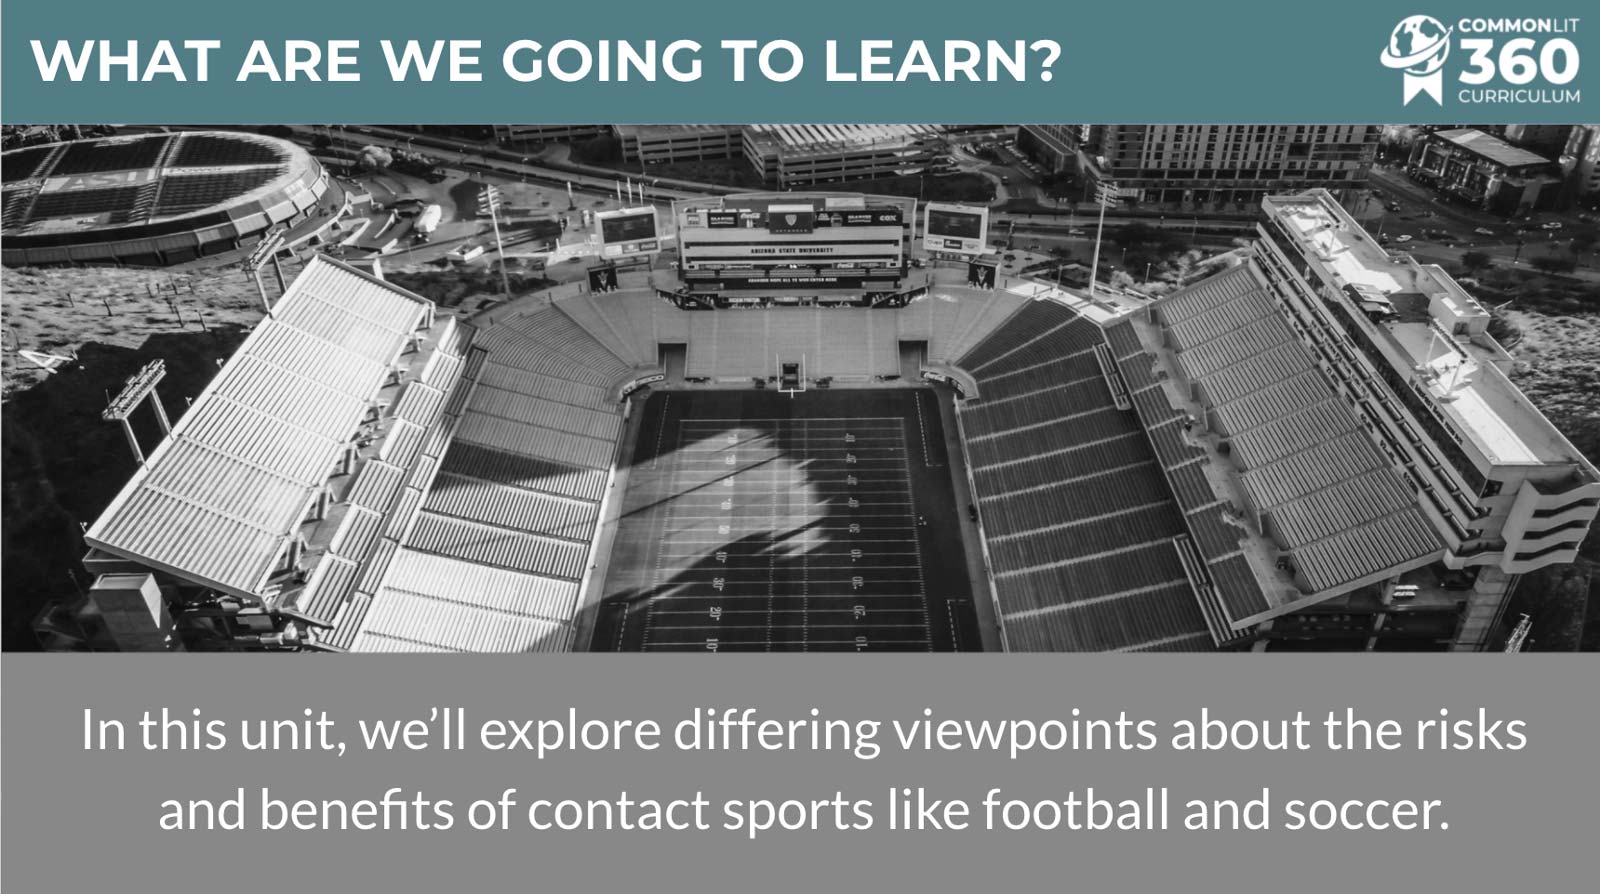 A slide from a CommonLit 360 unit that says "What are we going to learn? In this unit, we'll explore differing viewpoints about the risks and benefits of contact sports like football and soccer."